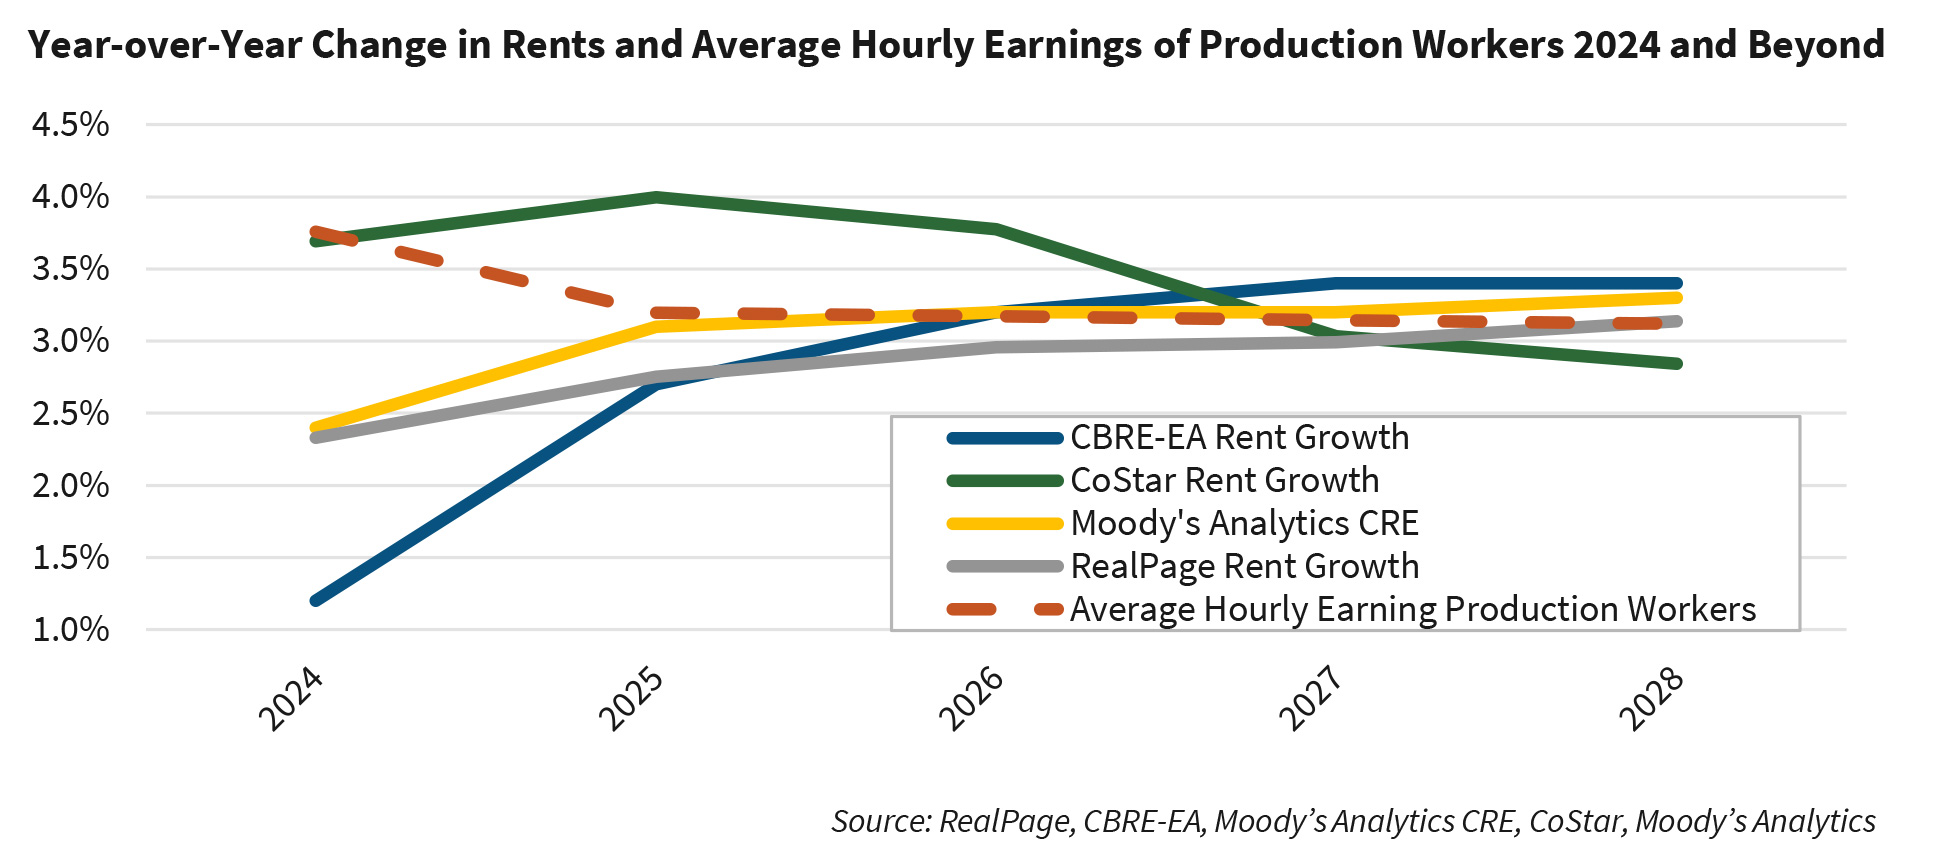 Year-over-Year Change in Rents and Average Hourly Earnings of Production Workers 2024 and Beyond